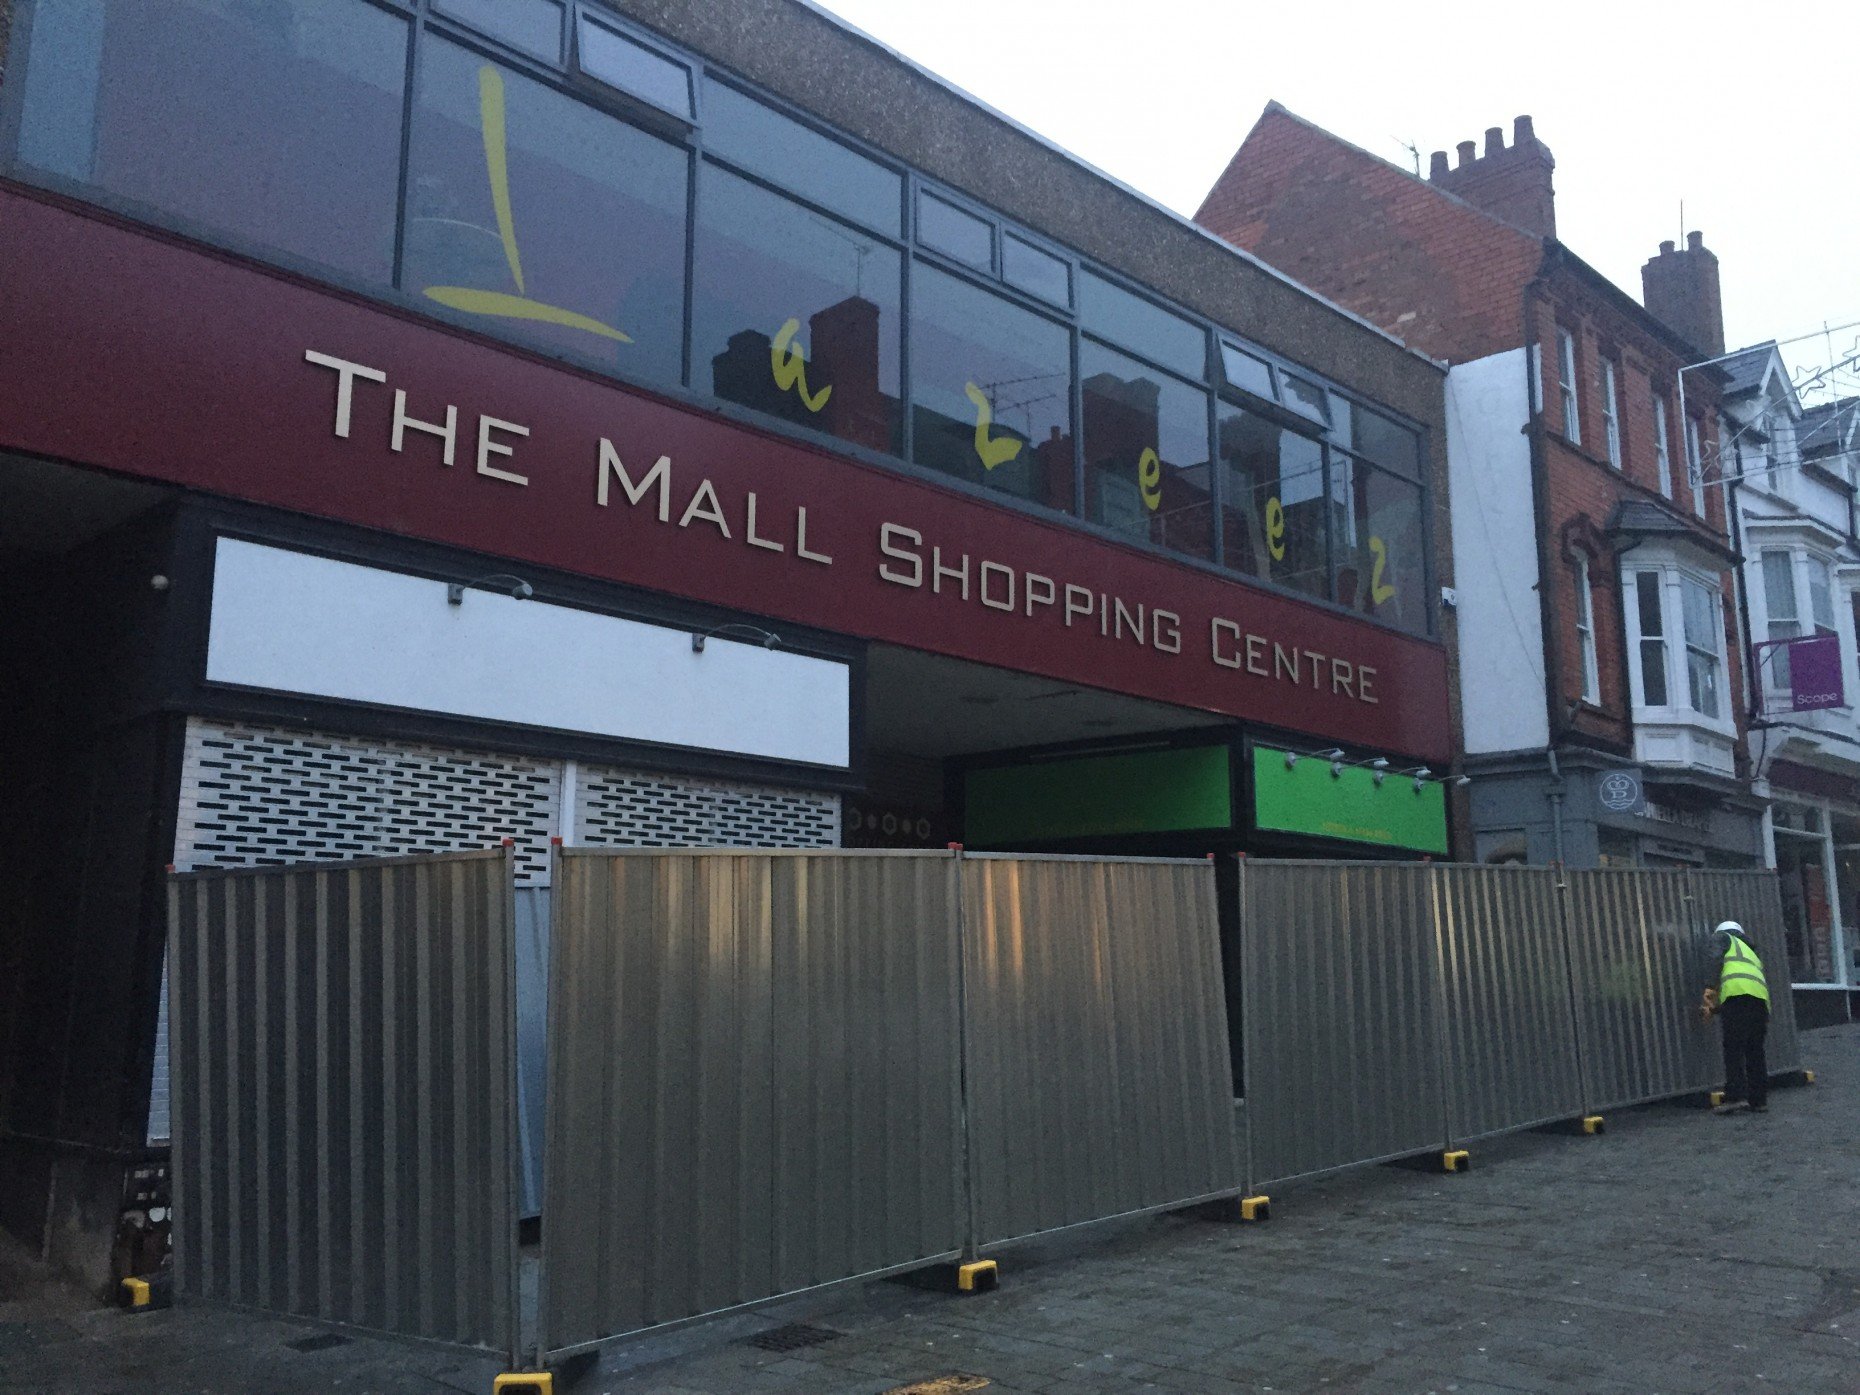 The transformation has begun at the Mall shopping centre. Photo: The Lincolnite